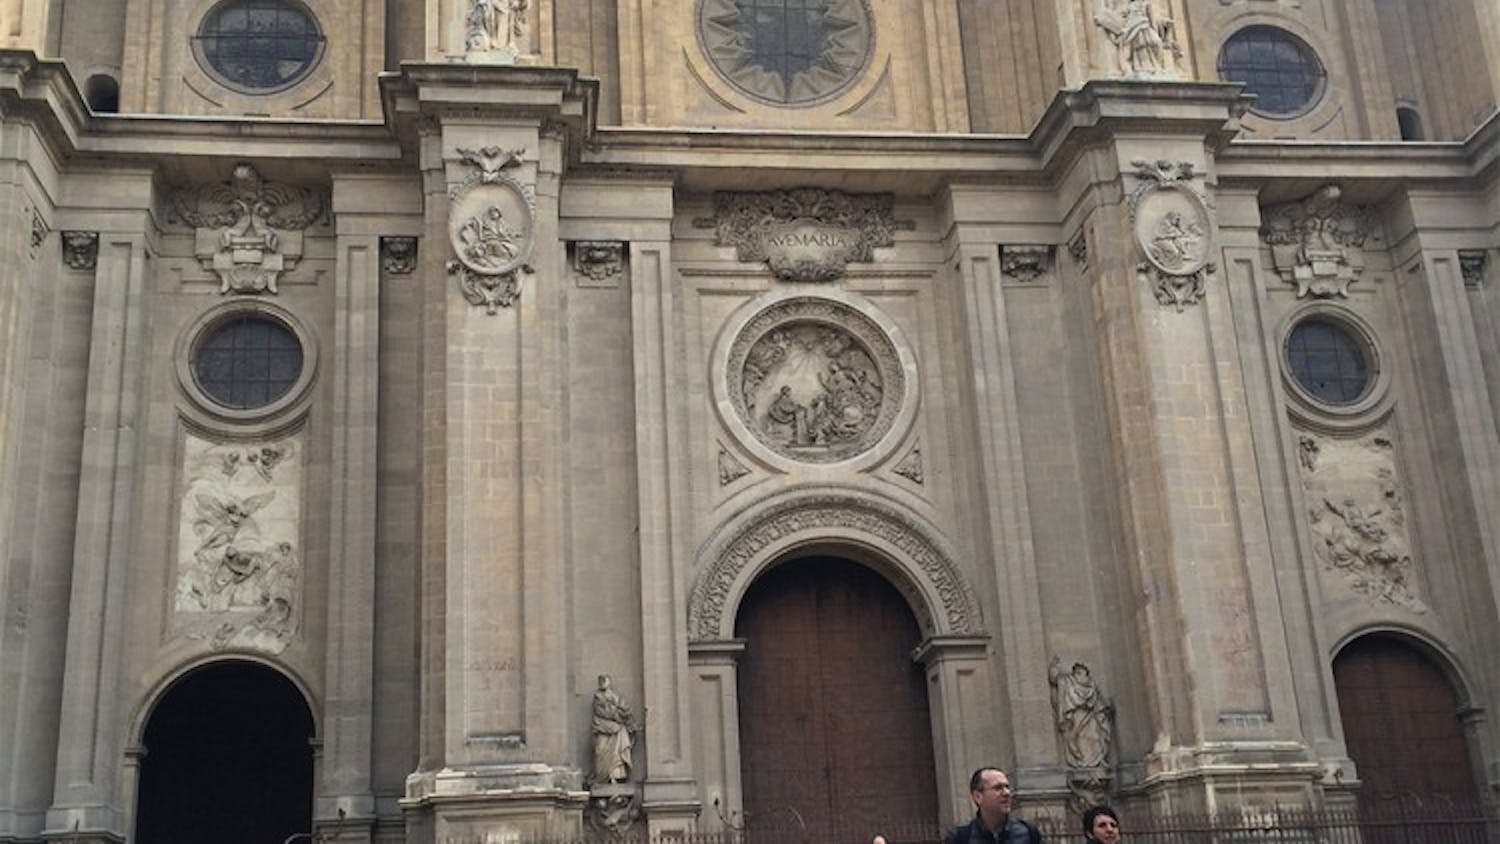 Visitors walk in front of la Catedral in Granada, Spain. The church is one of the area's top tourist attractions.